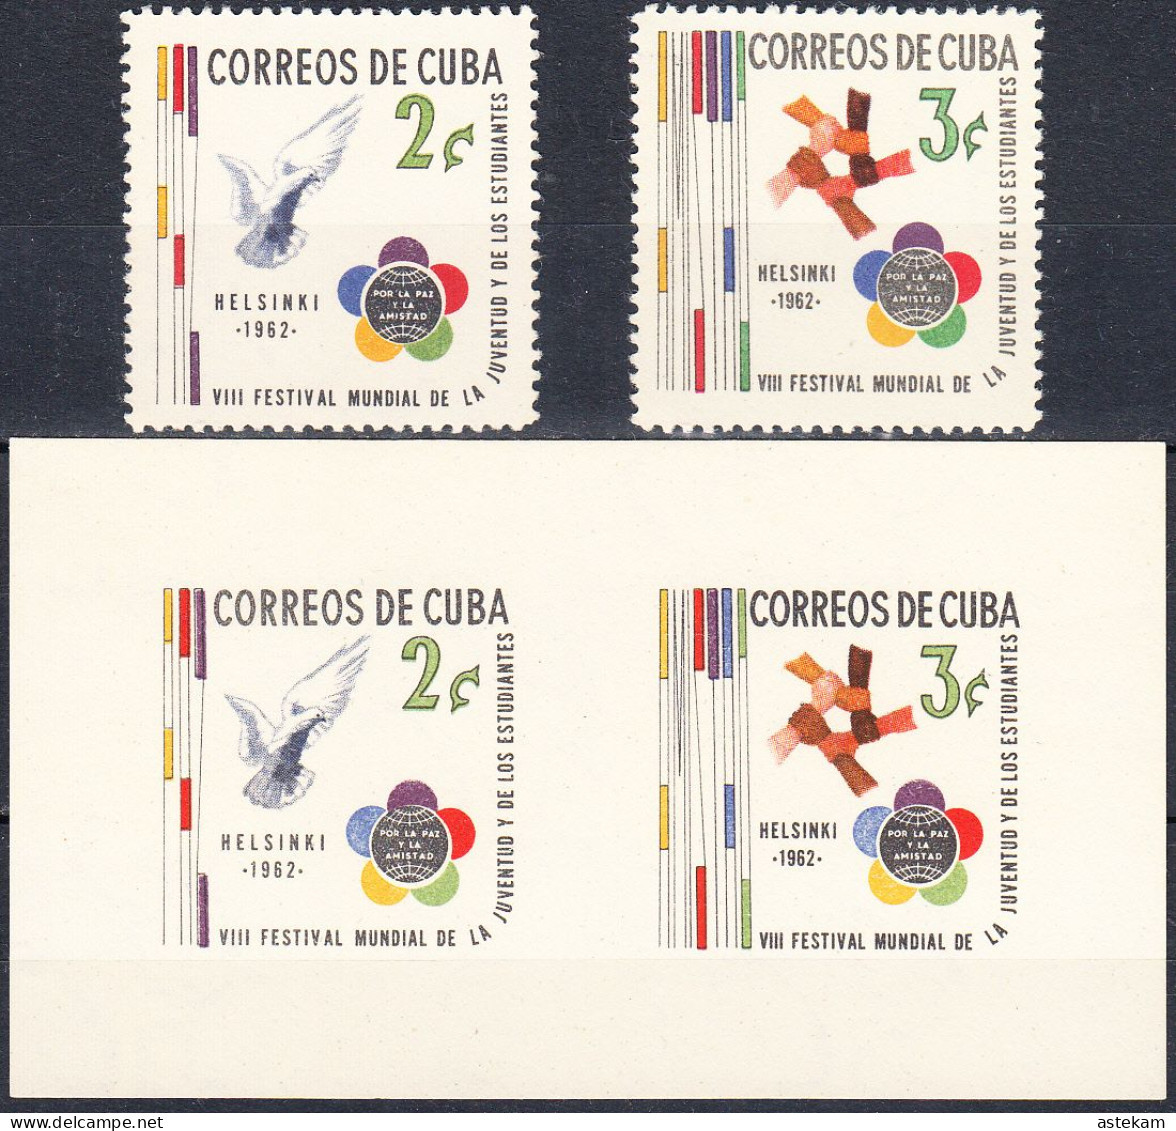 CUBA 1962, 8th WORLD FESTIVAL Of YOUTH And STUDENTS In HELSINKI, COMPLETE MNH SERIES+BLOCK With GOOD QUALITY,*** - Nuevos